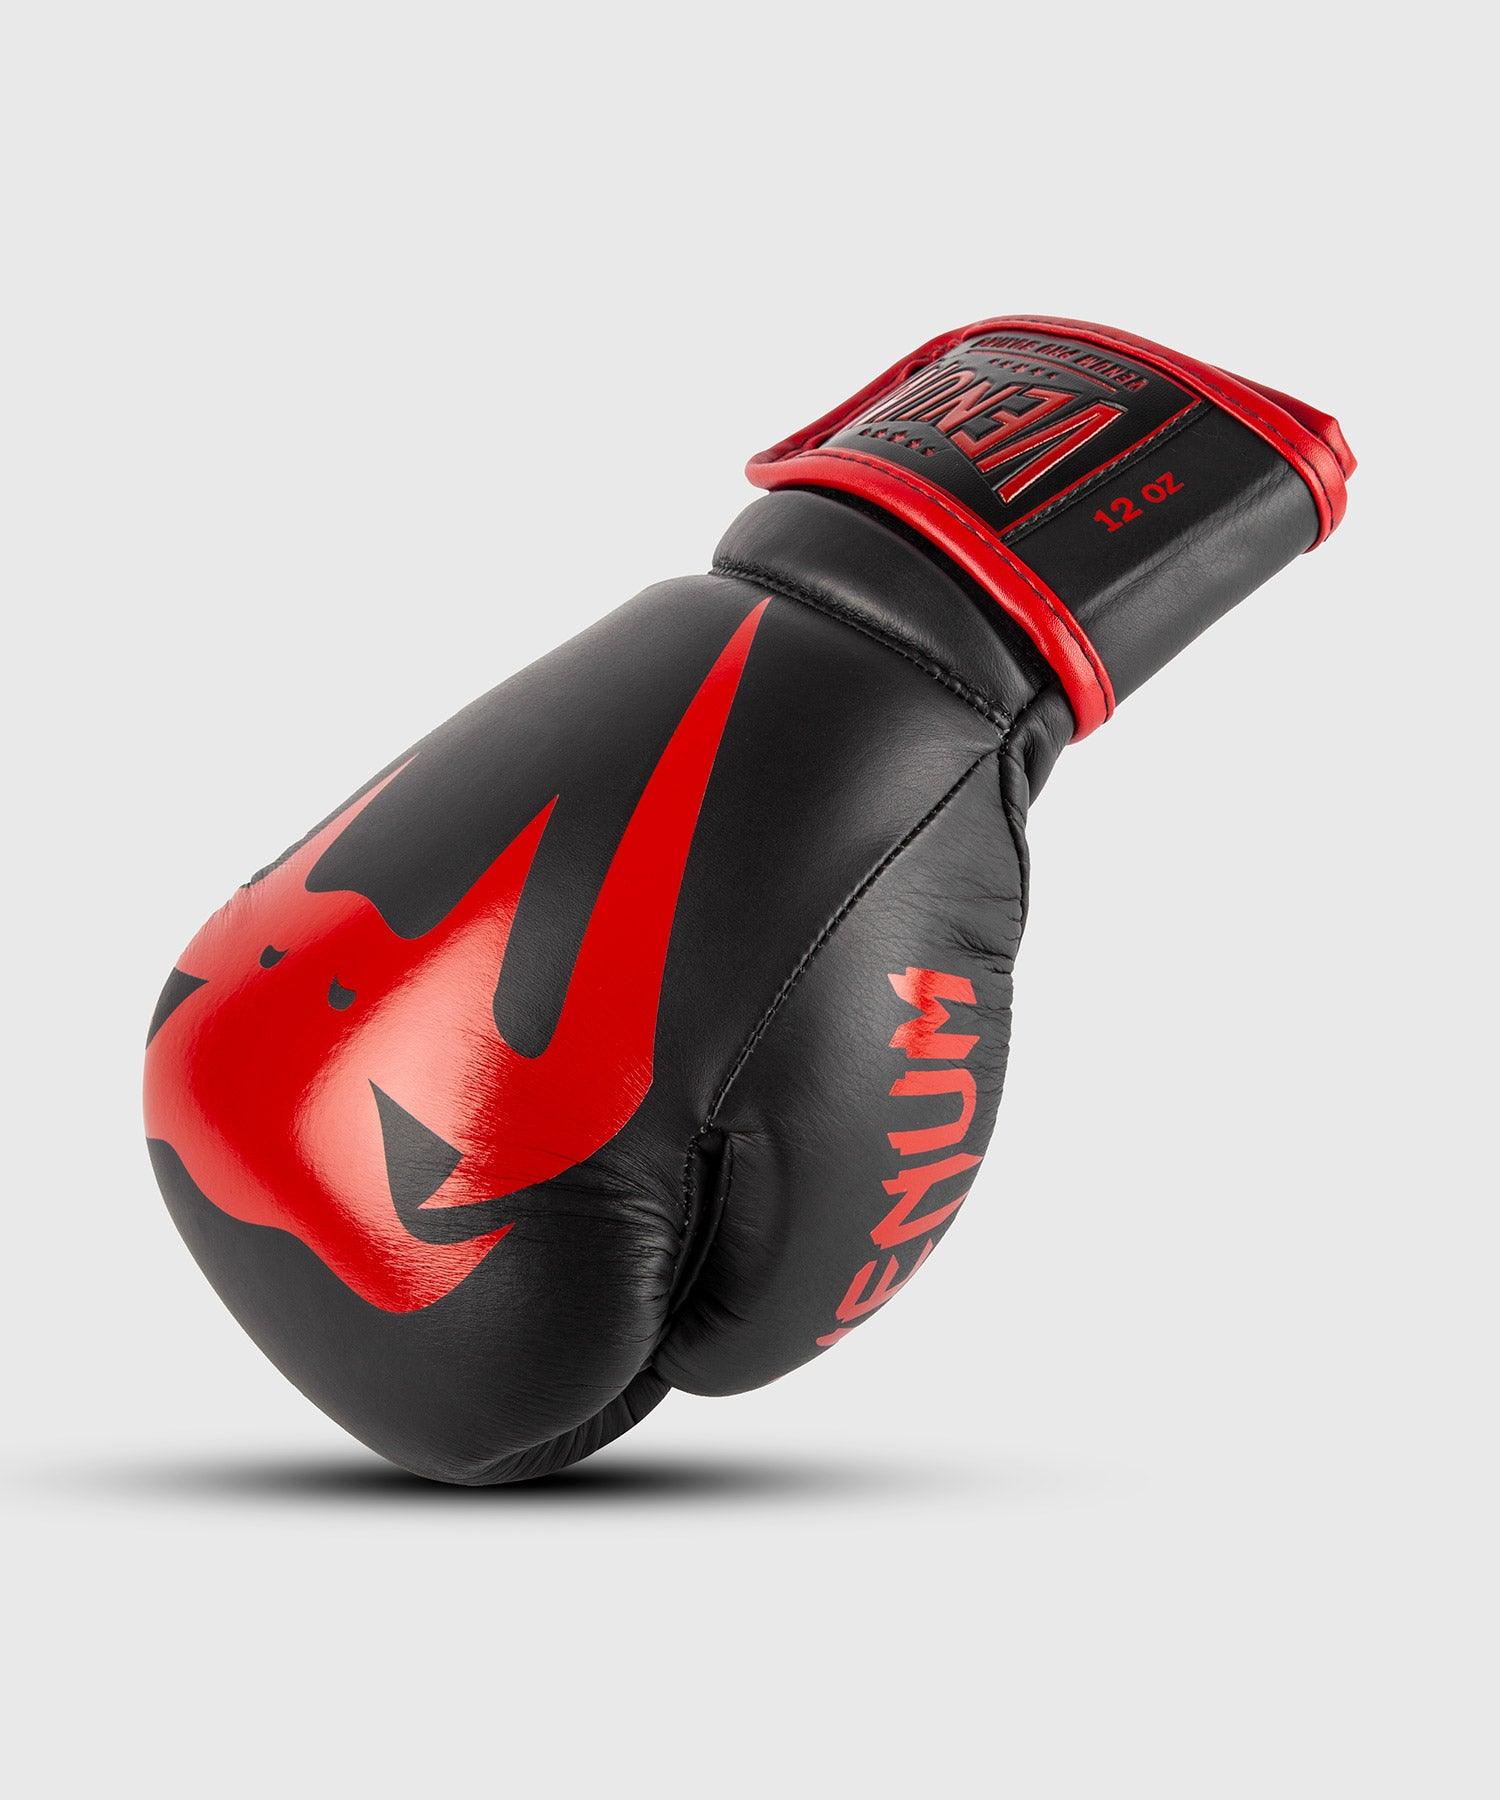 Venum Giant 2.0 Pro Boxing Gloves Velcro - Black/Red Picture 1